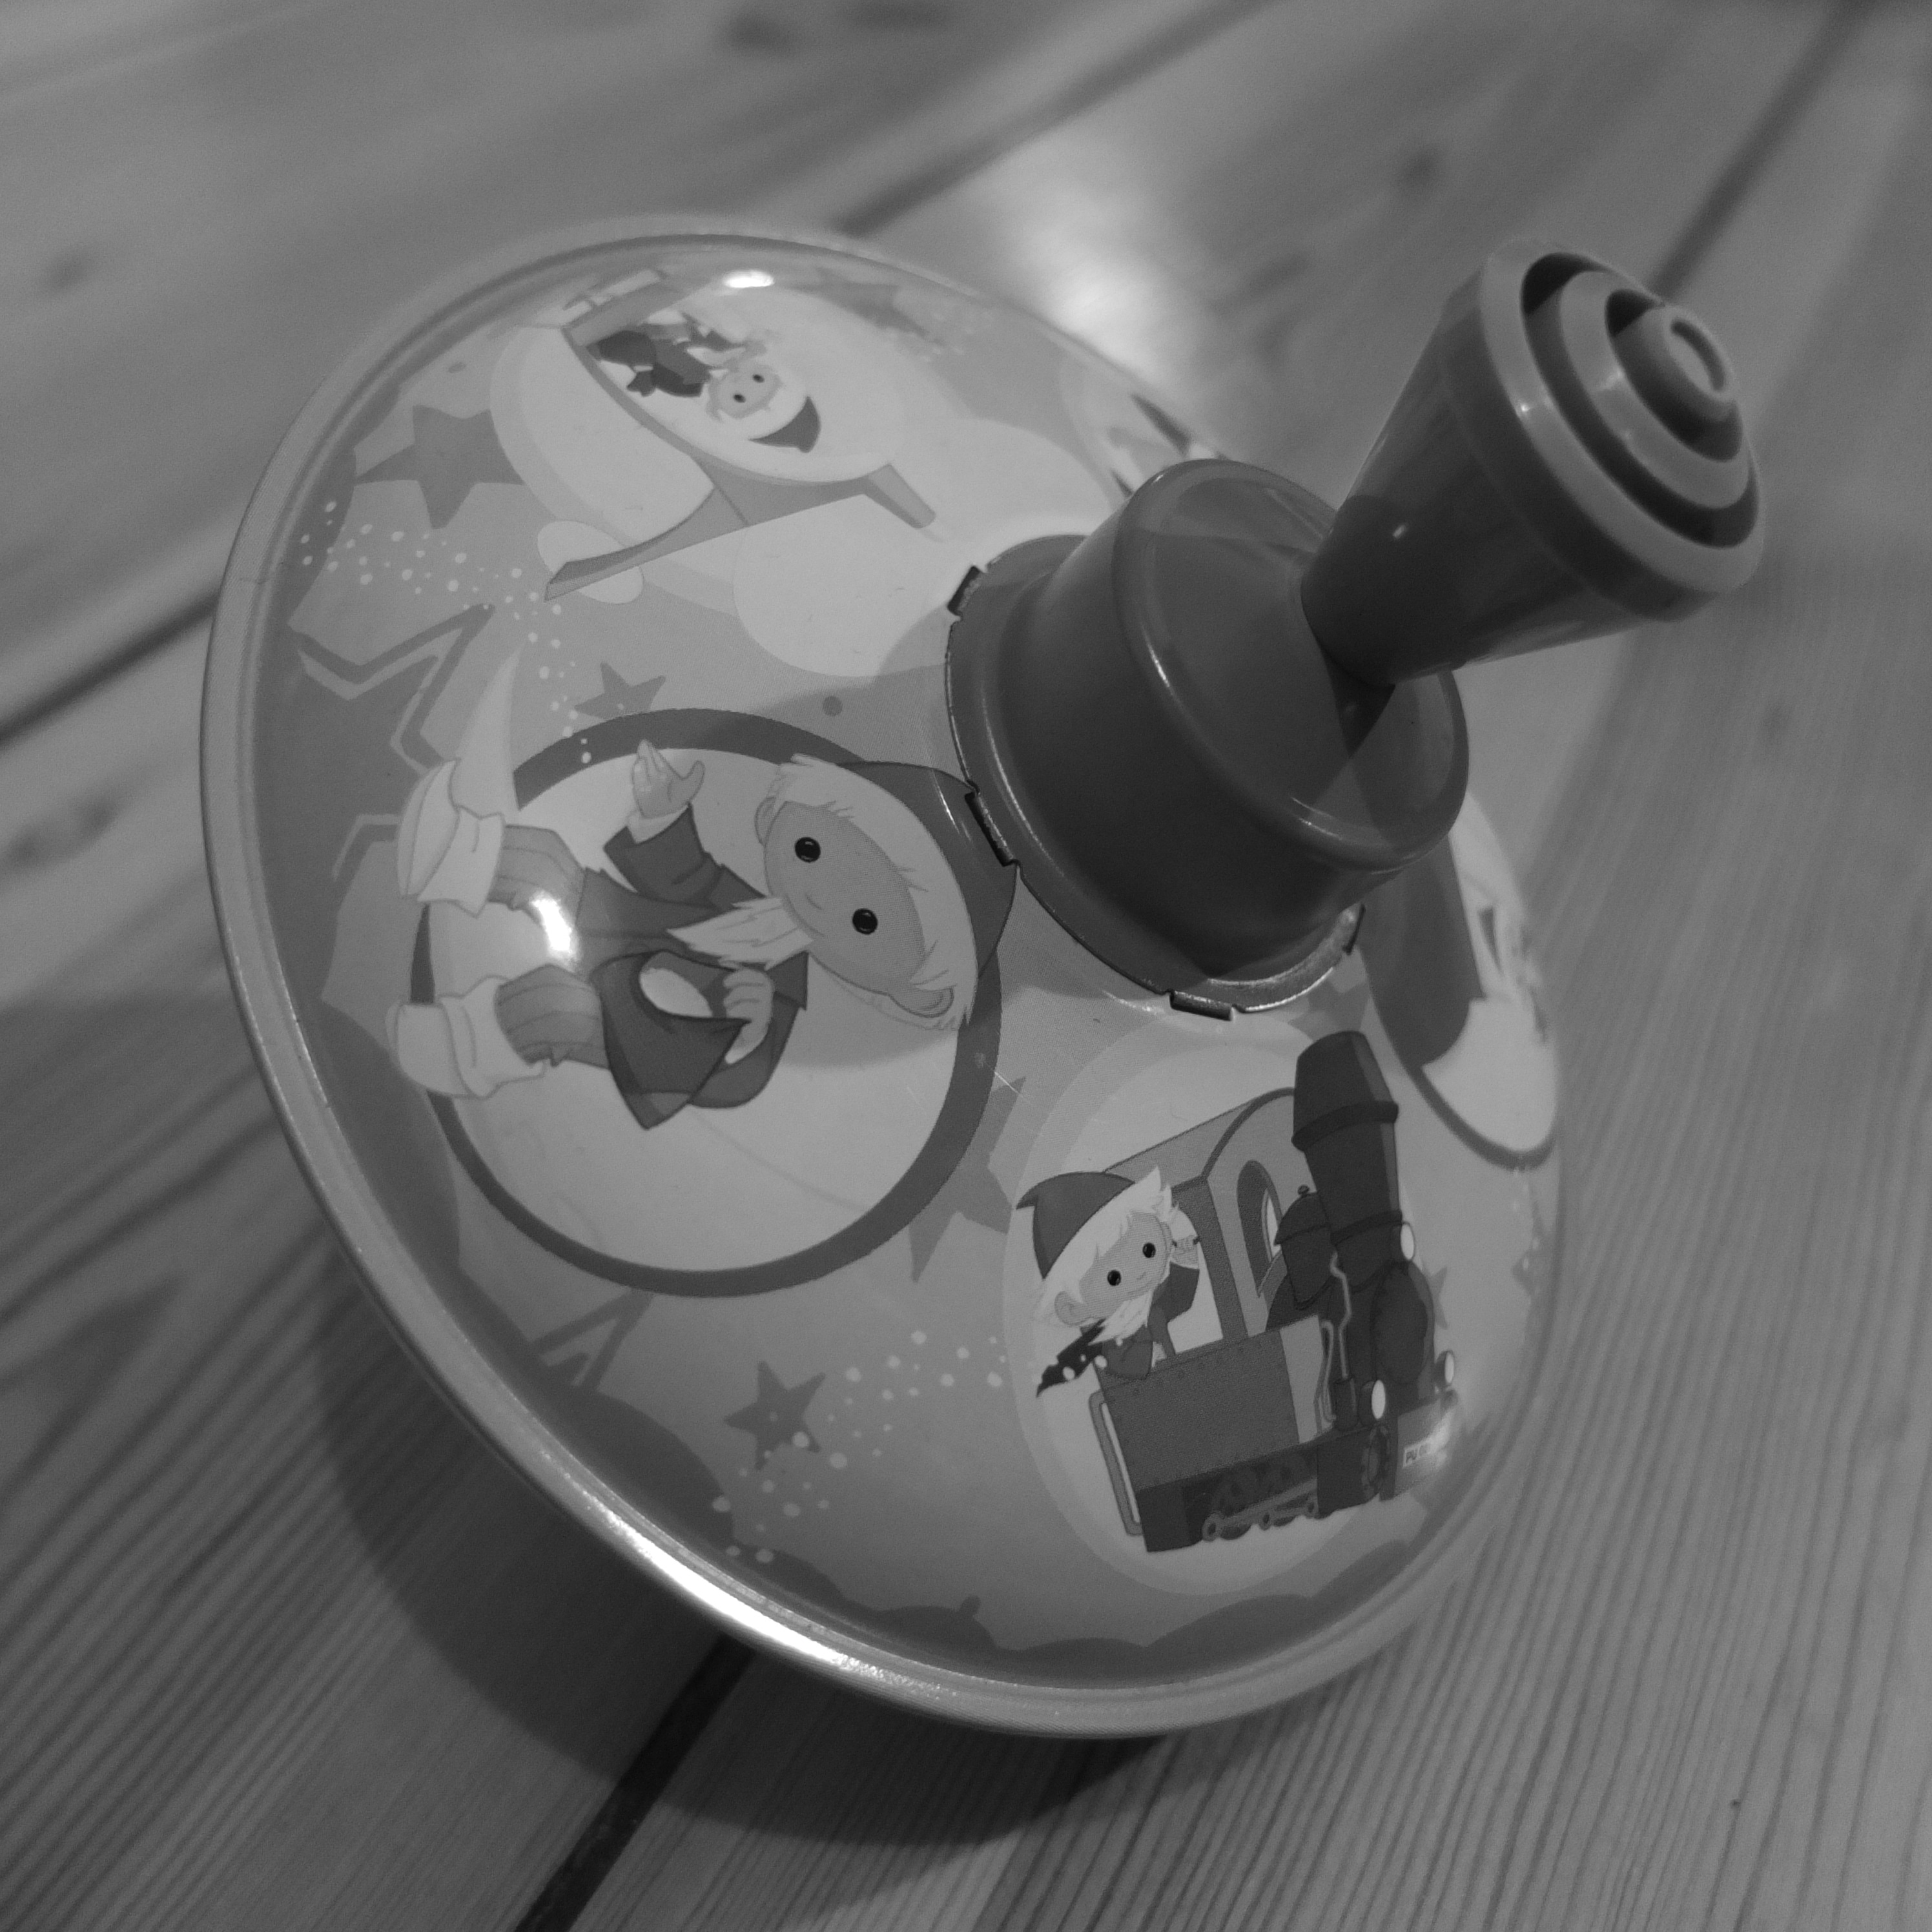 grayscale photo of activity toy